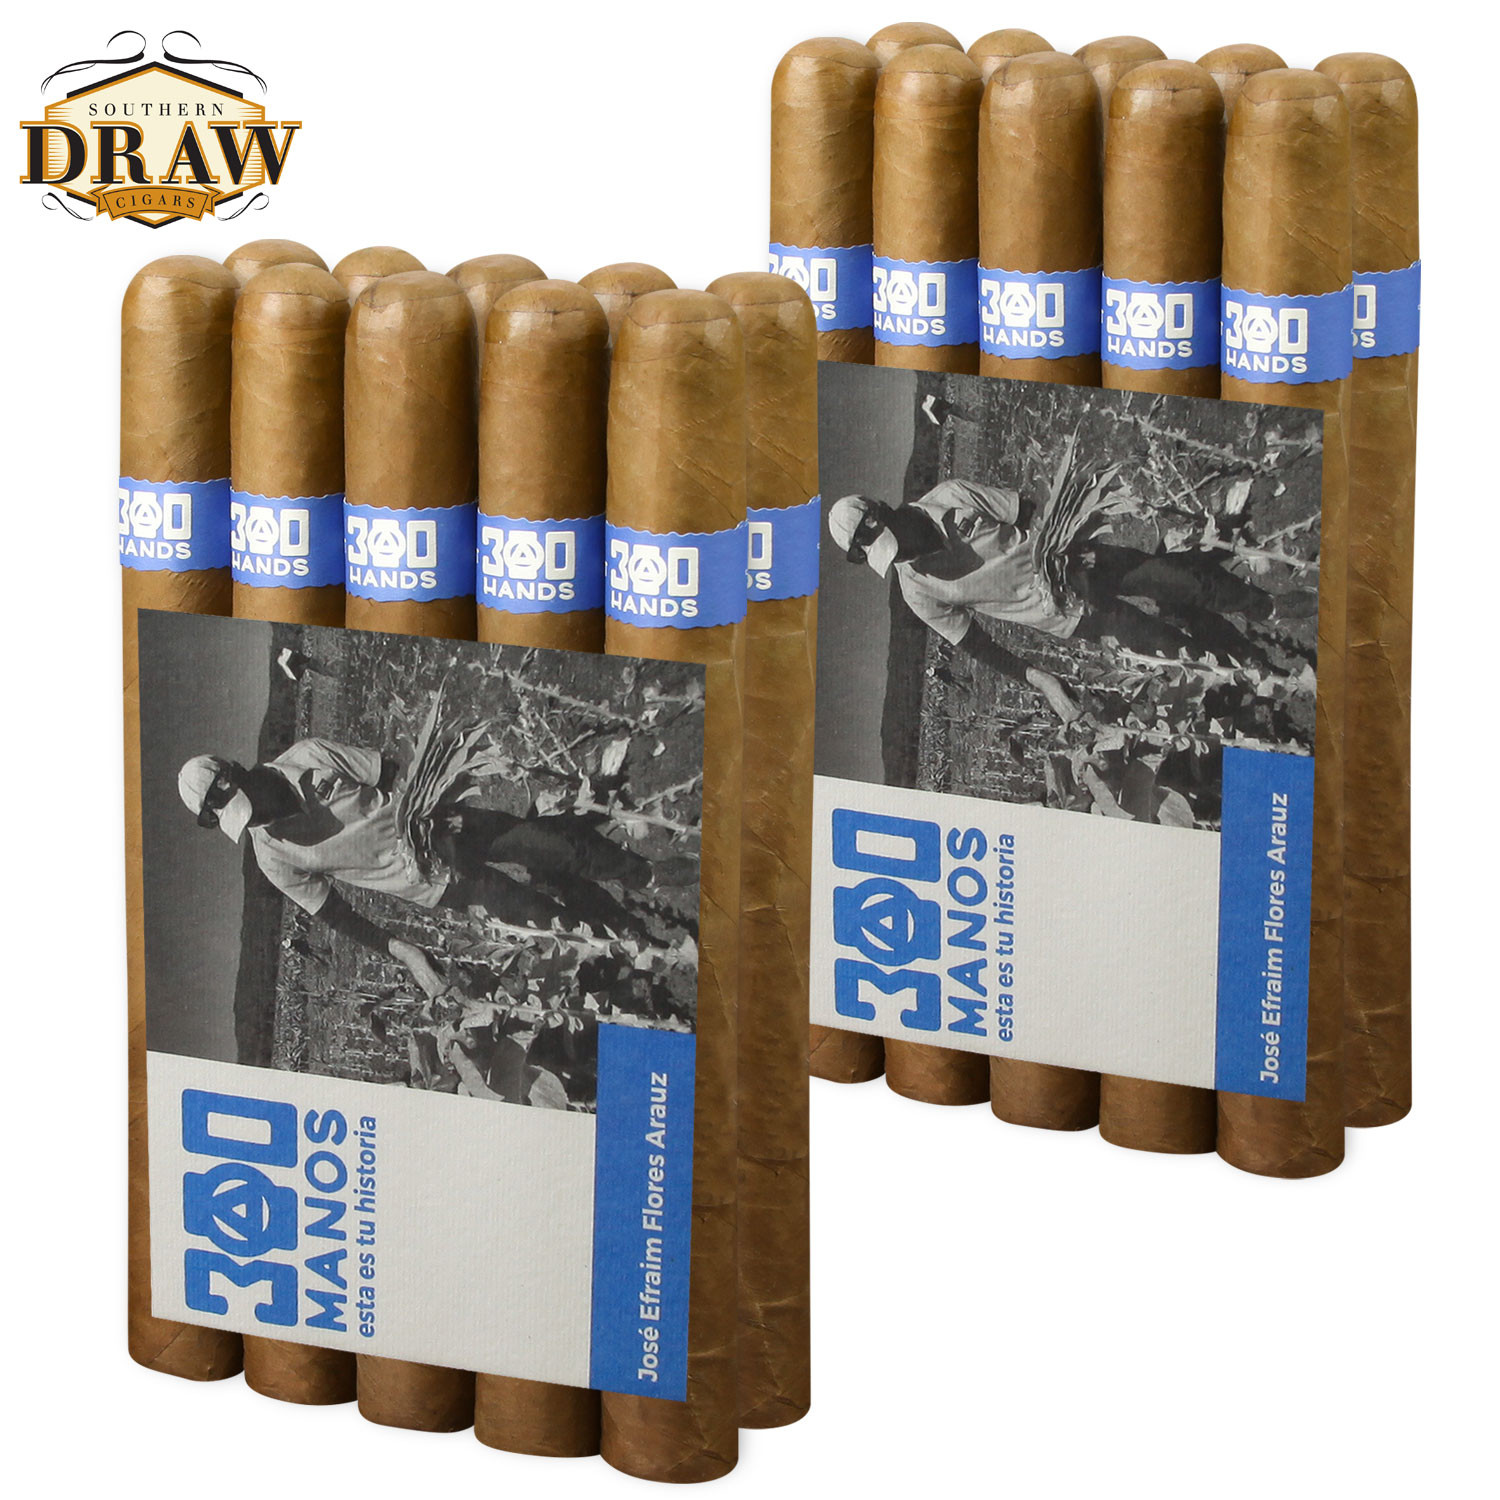 Southern Draw 300 Hands Connecticut Cigar Page